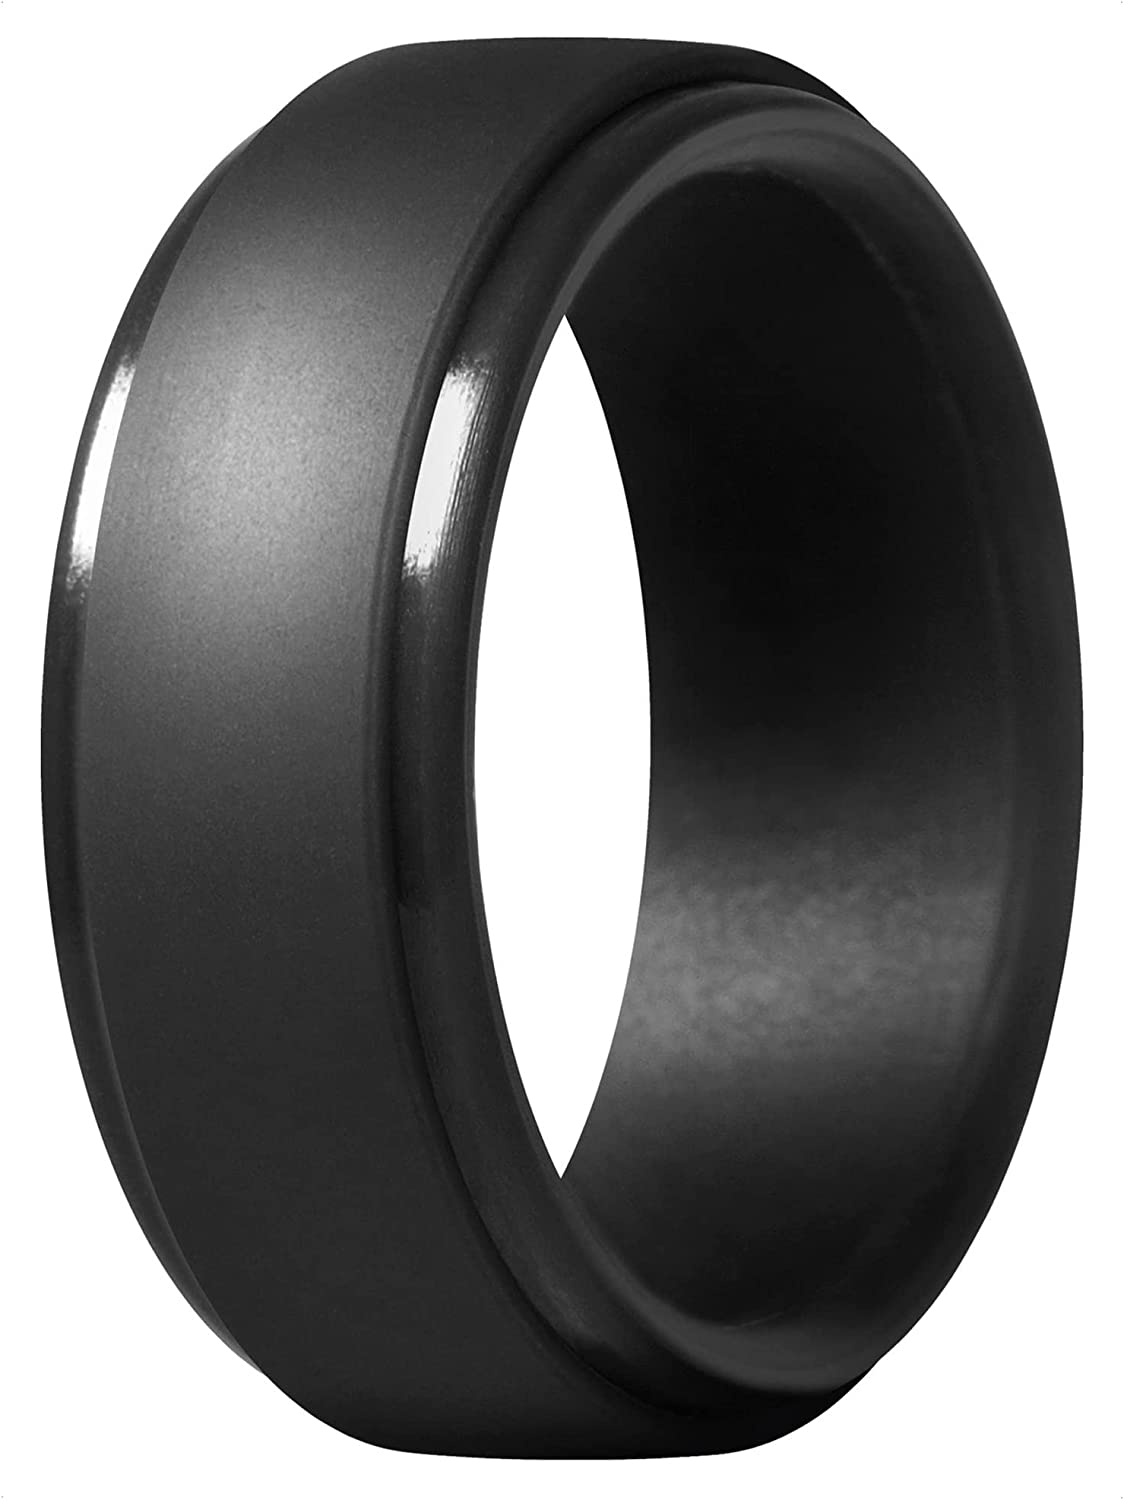 Thunderfit Silicone Ring Men, Step Edge Rubber Wedding Band, 10mm Wide, 2.5mm Thick